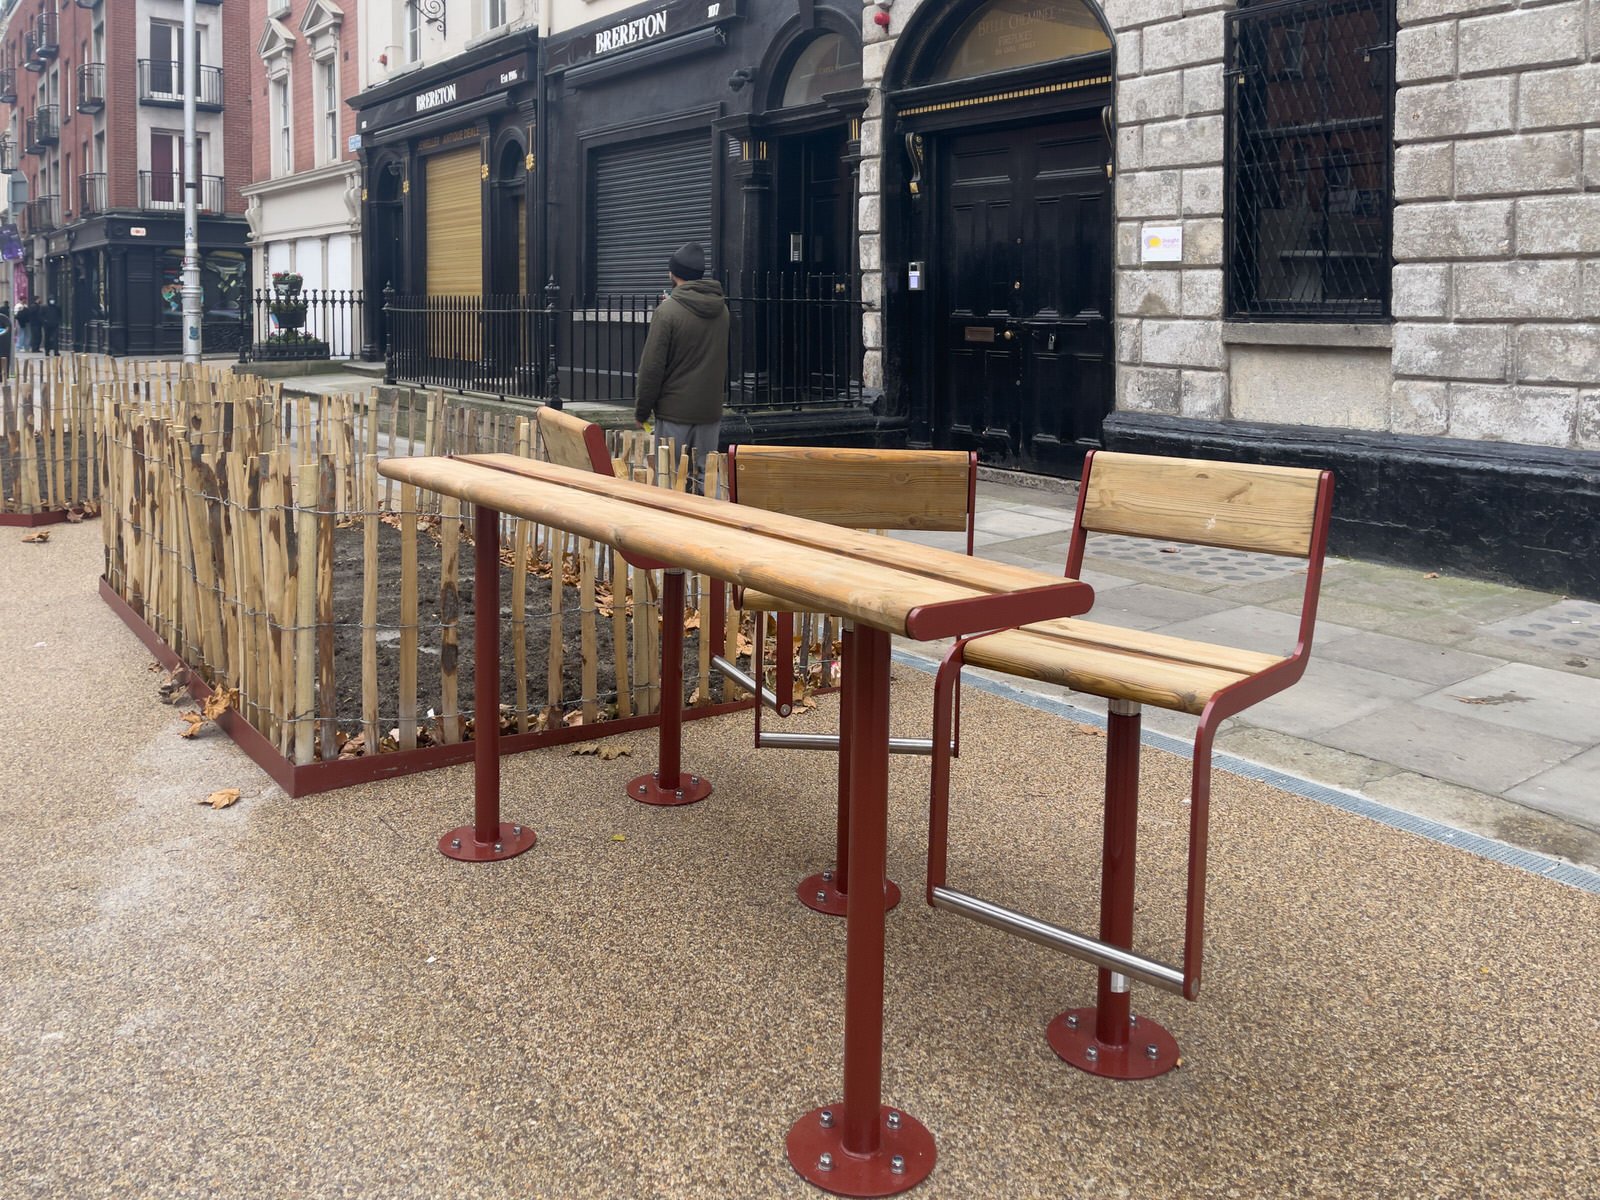 THE NEW STREET FURNITURE IS BEING INSTALLED ON CAPEL STREET [BUT THERE ARE FEW VISITORS TO BE SEEN TODAY] 008